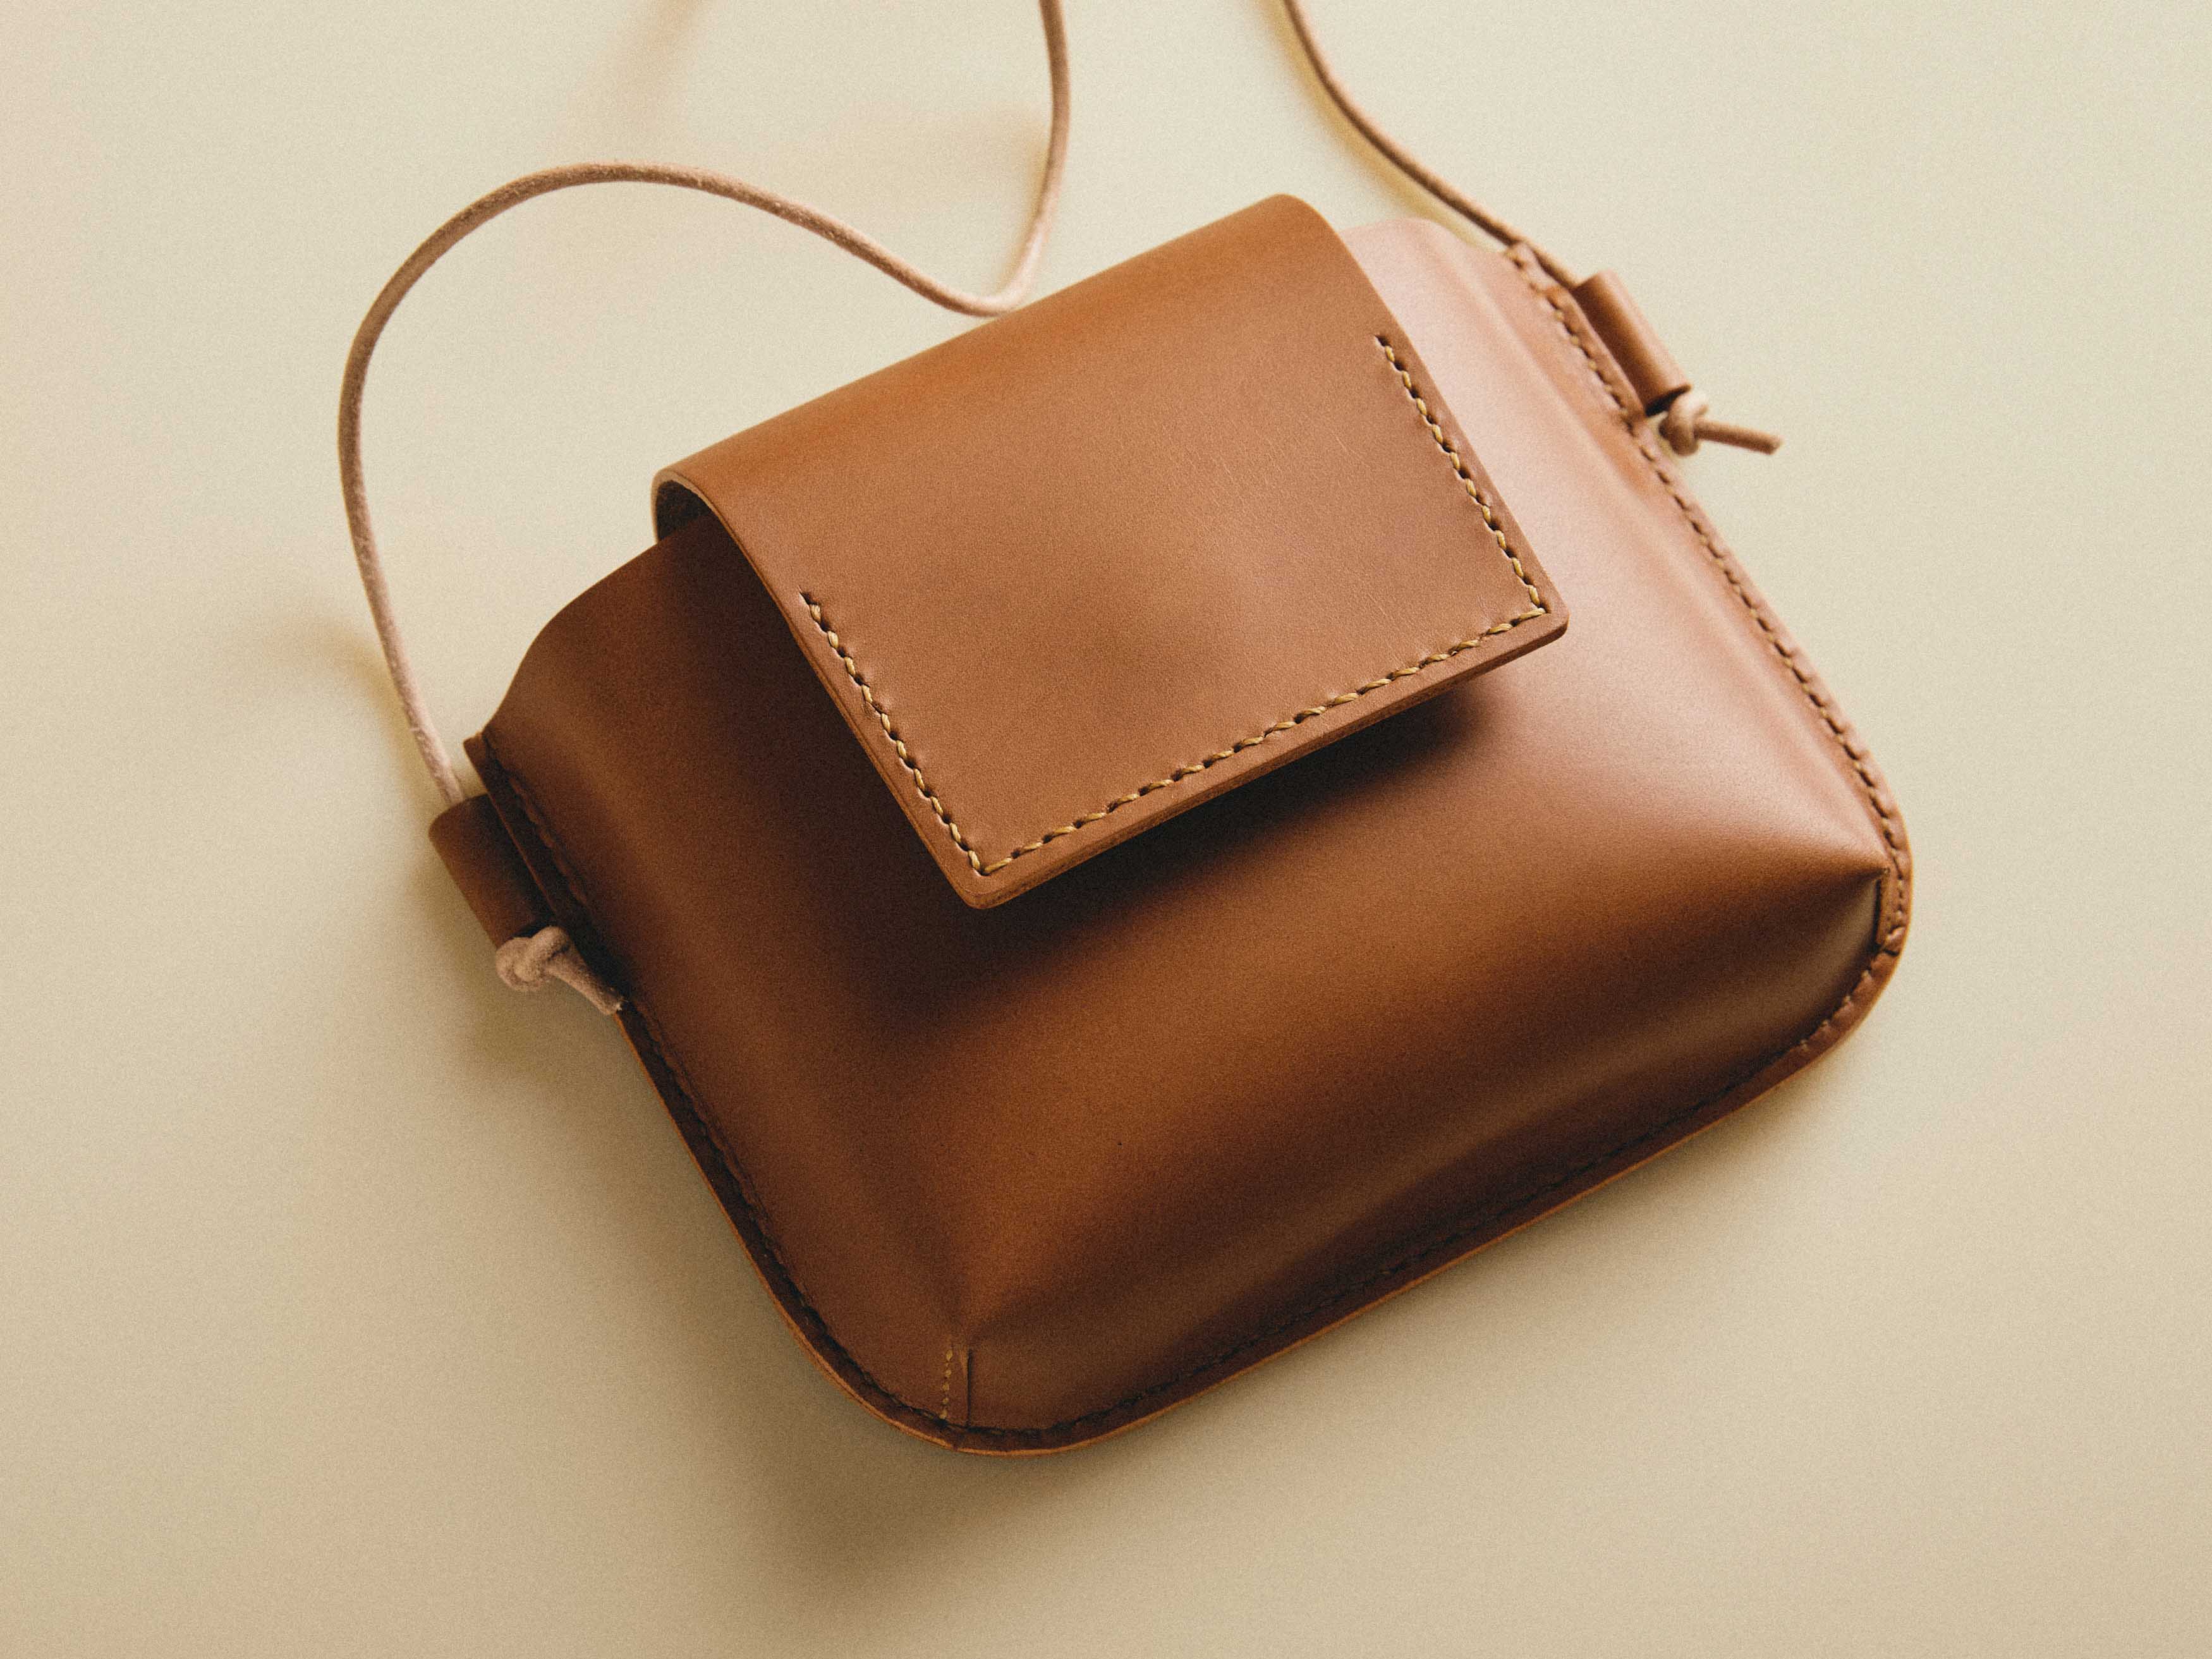 DIY Leather Bag Kit - Cross Body Satchel to make at home